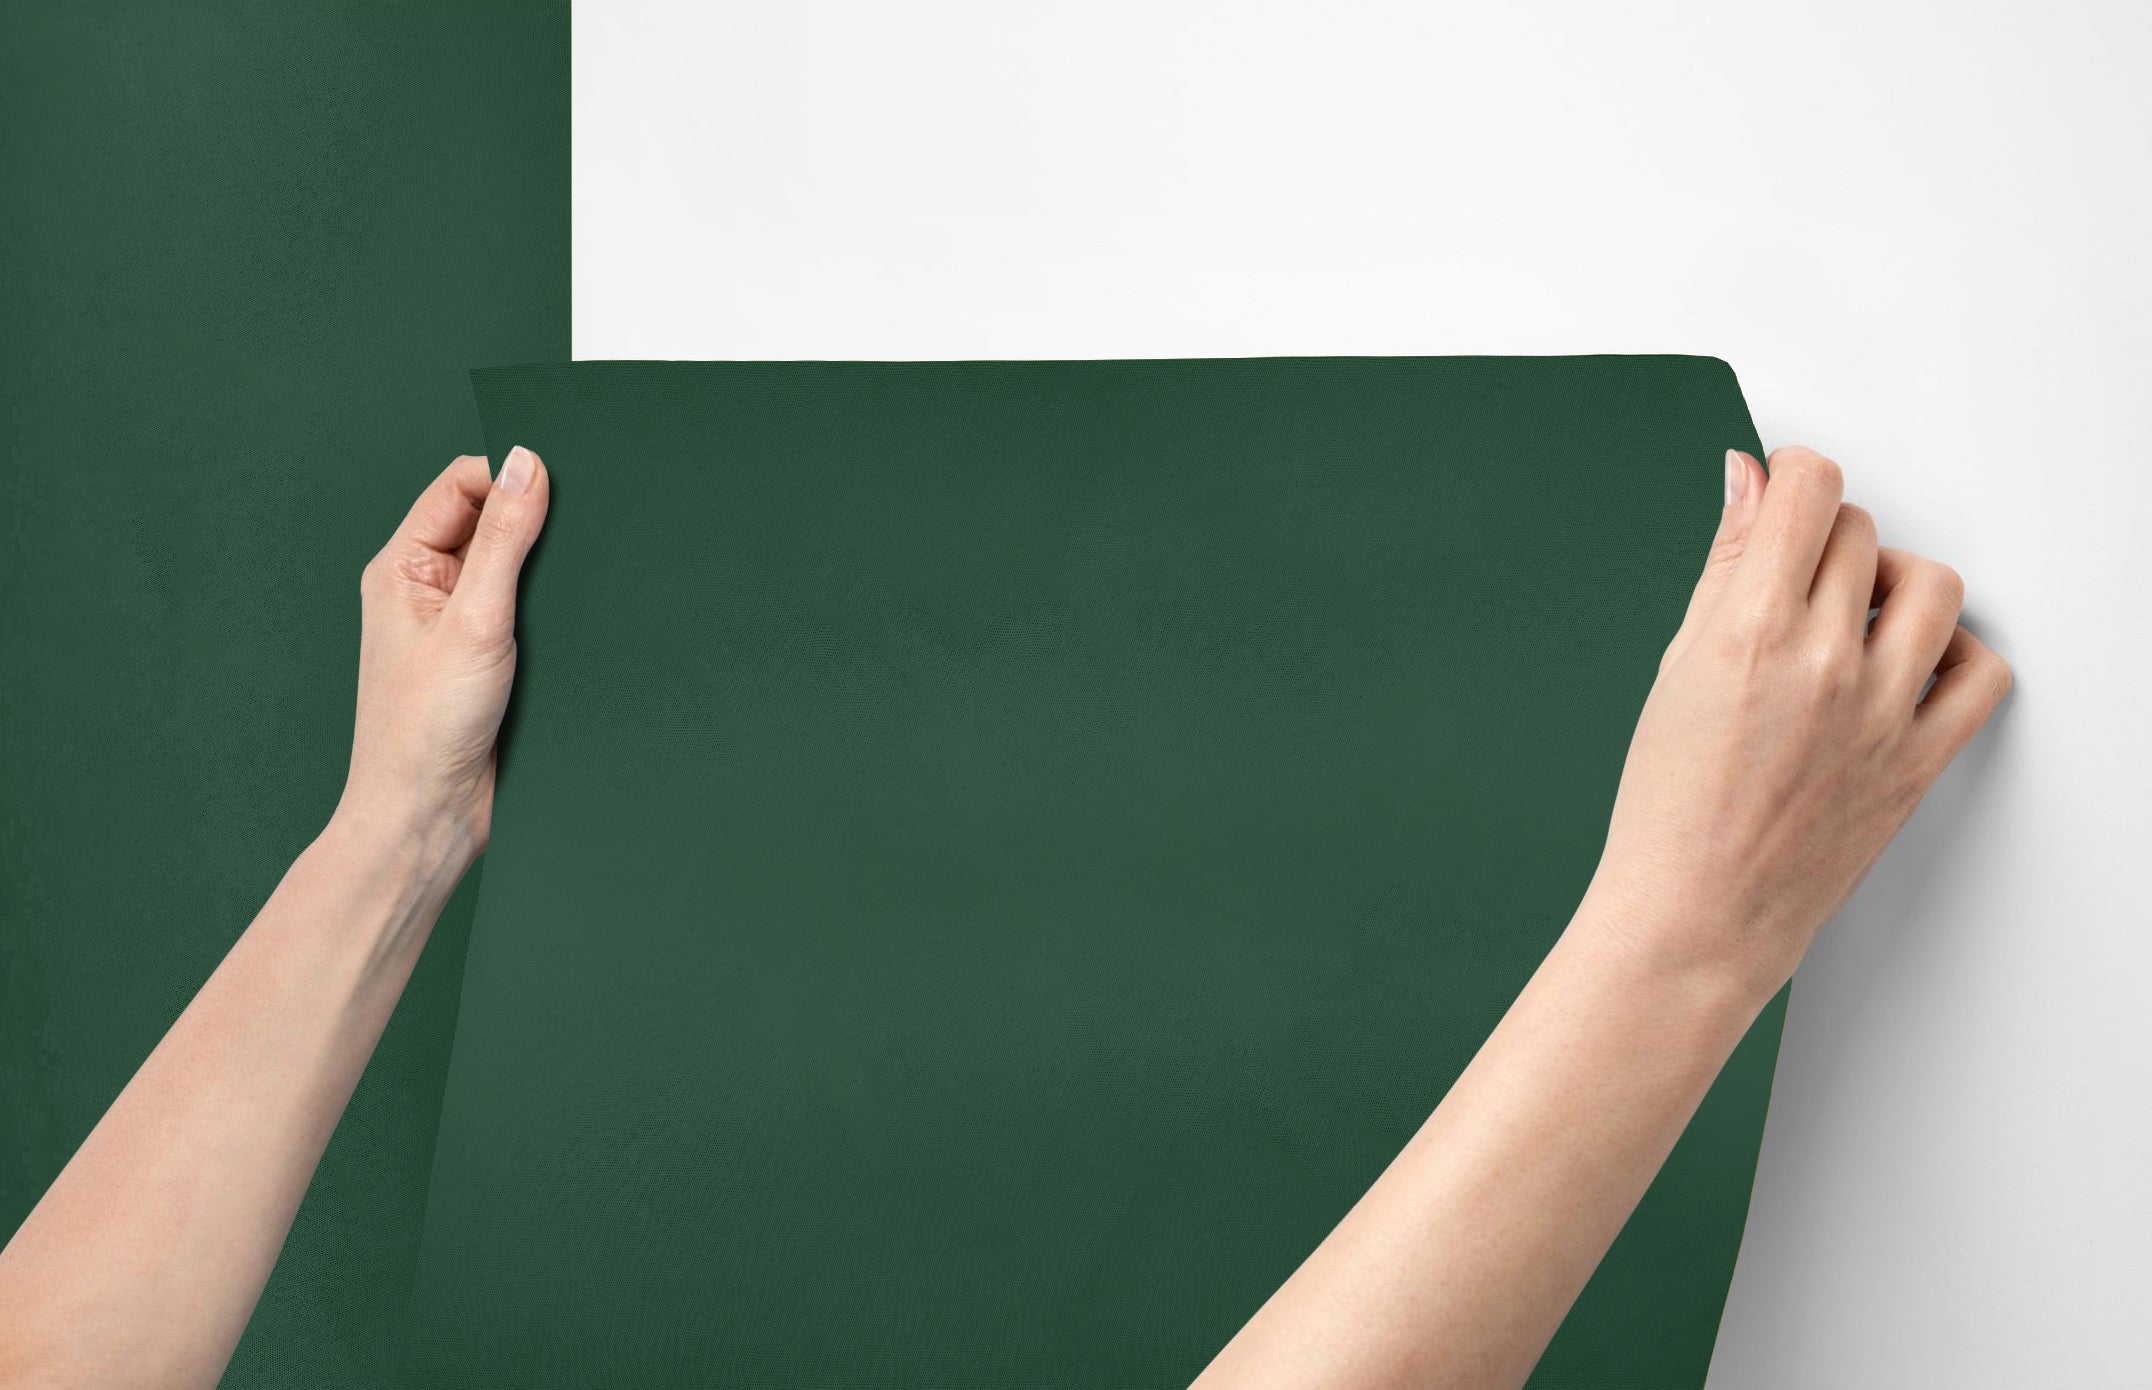 Peel & Stick Removable Re-usable Paint - Color RAL 6028 Pine Green - offRAL™ - RALRAW LLC, USA